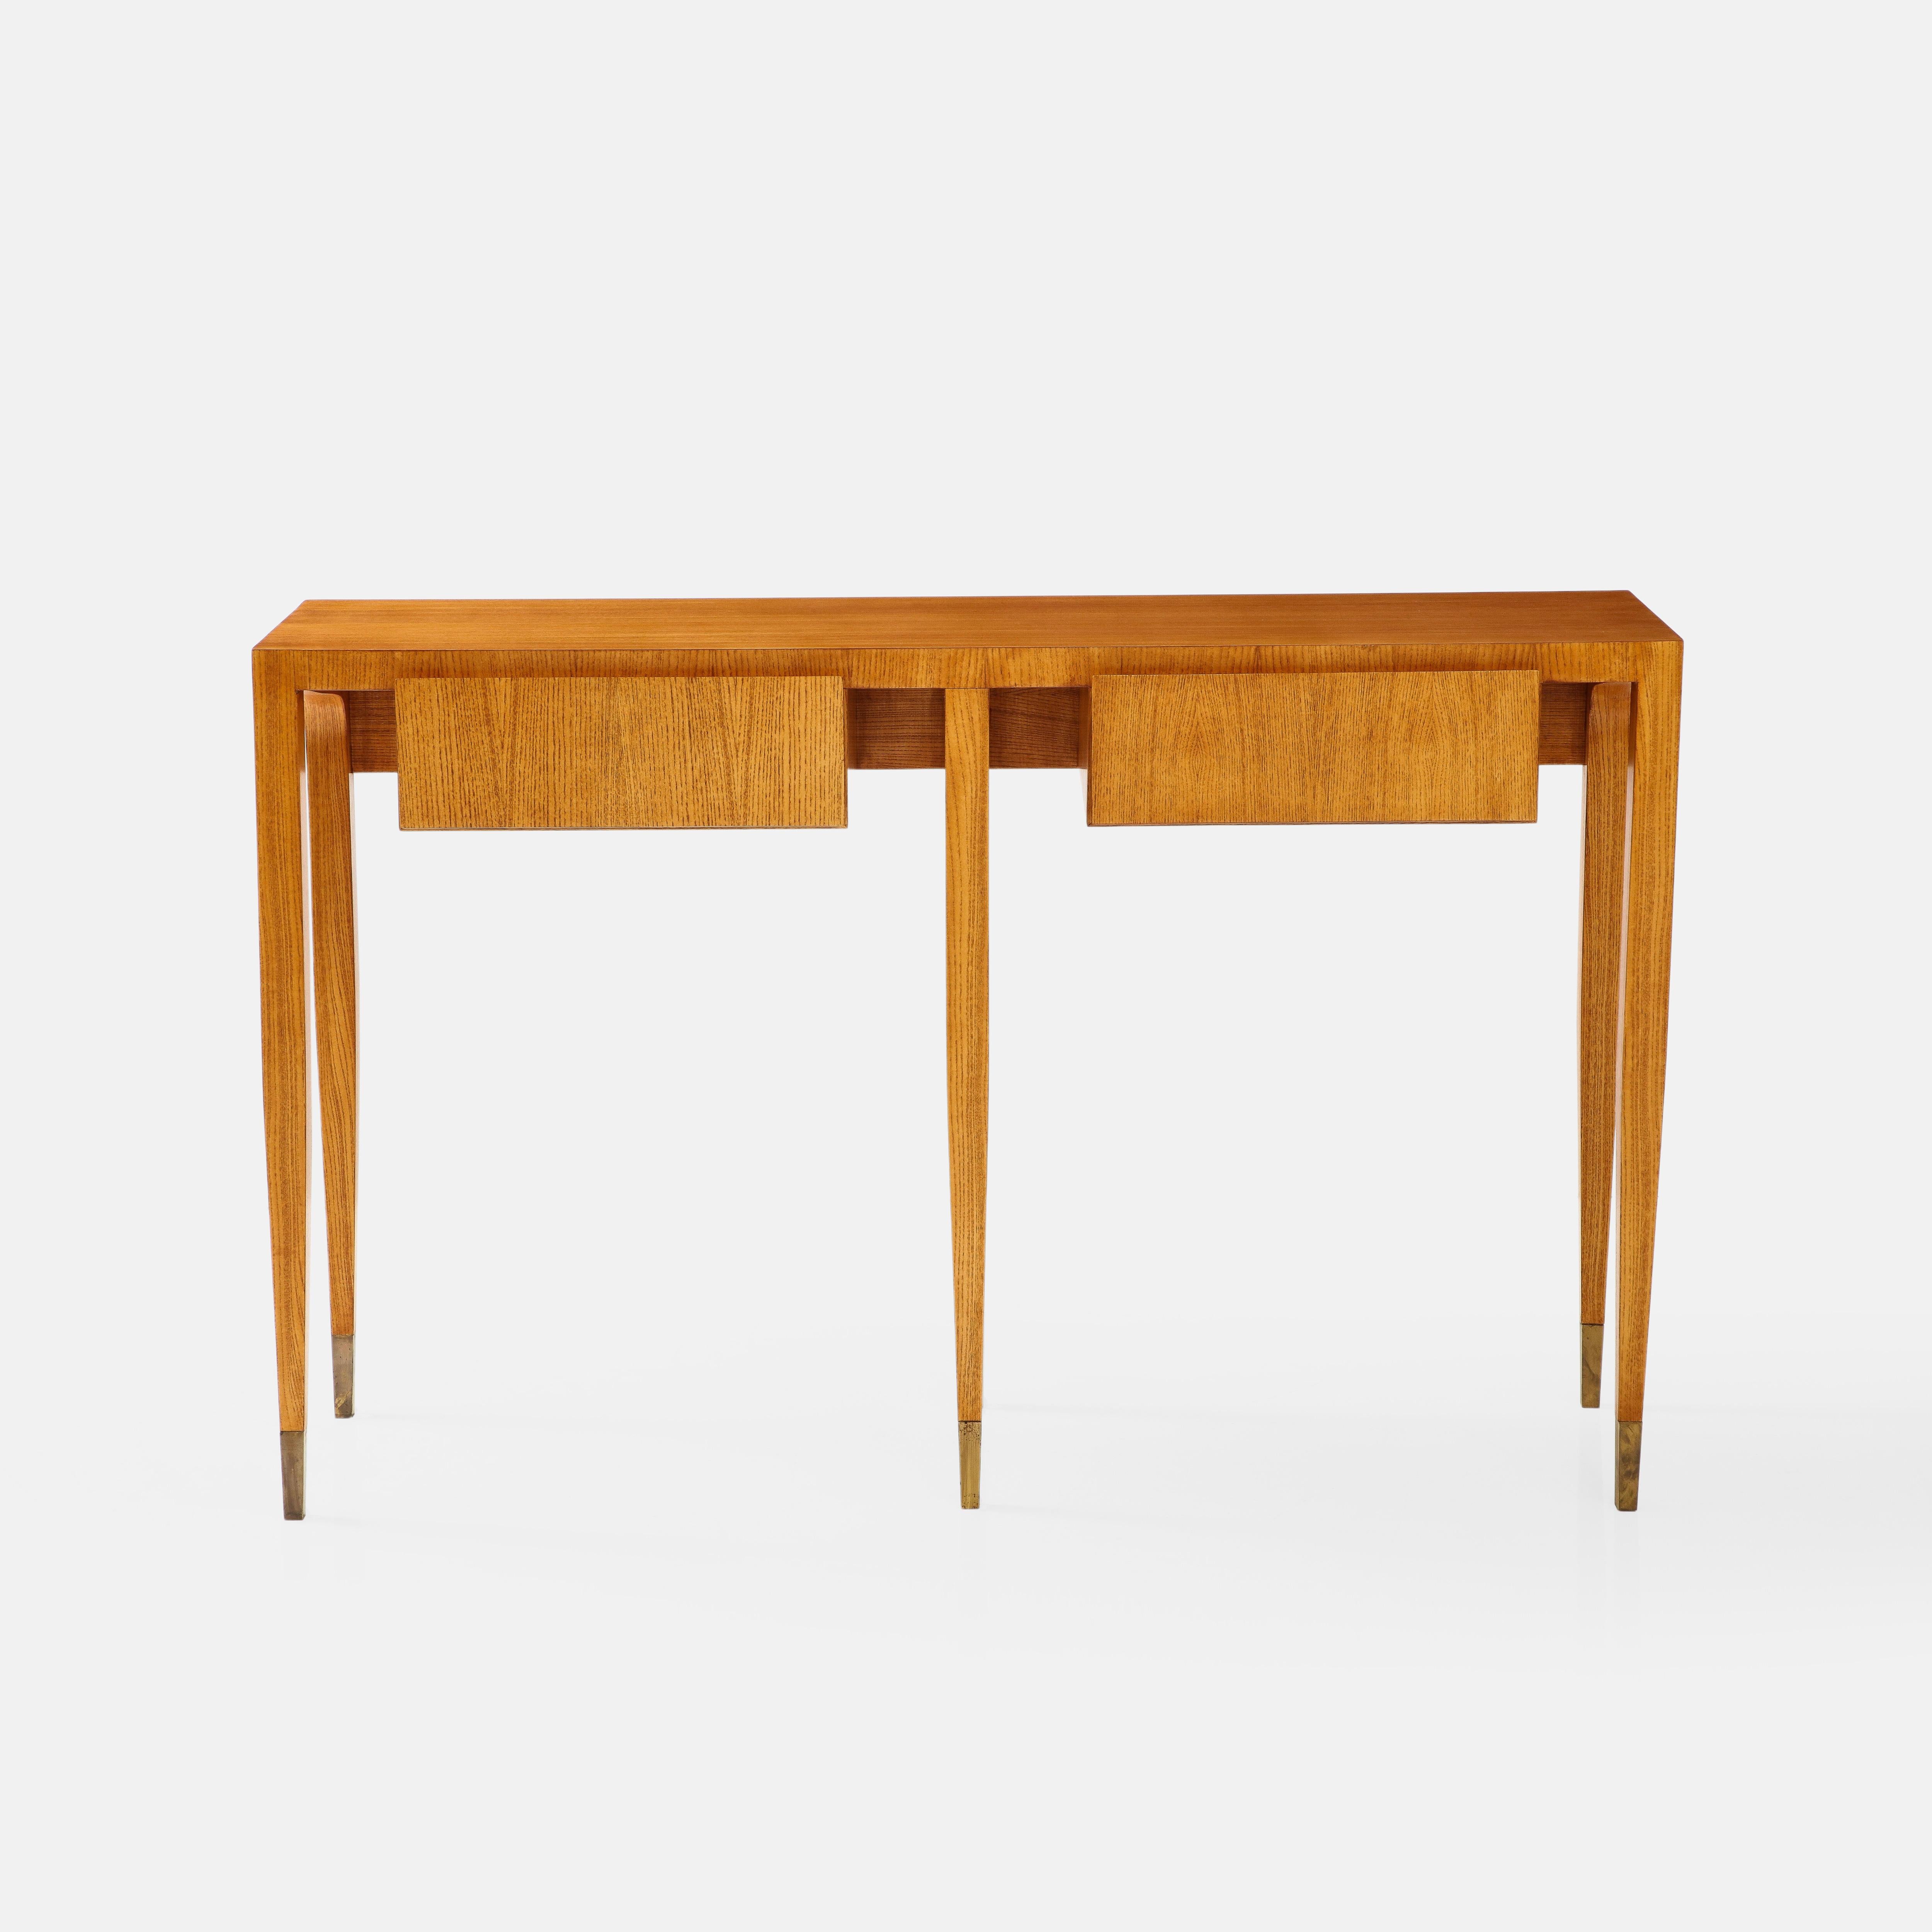 Mid-Century Modern Gio Ponti for Giordano Chiesa Rare Pair of Ash Wood Consoles, Italy, 1950s For Sale